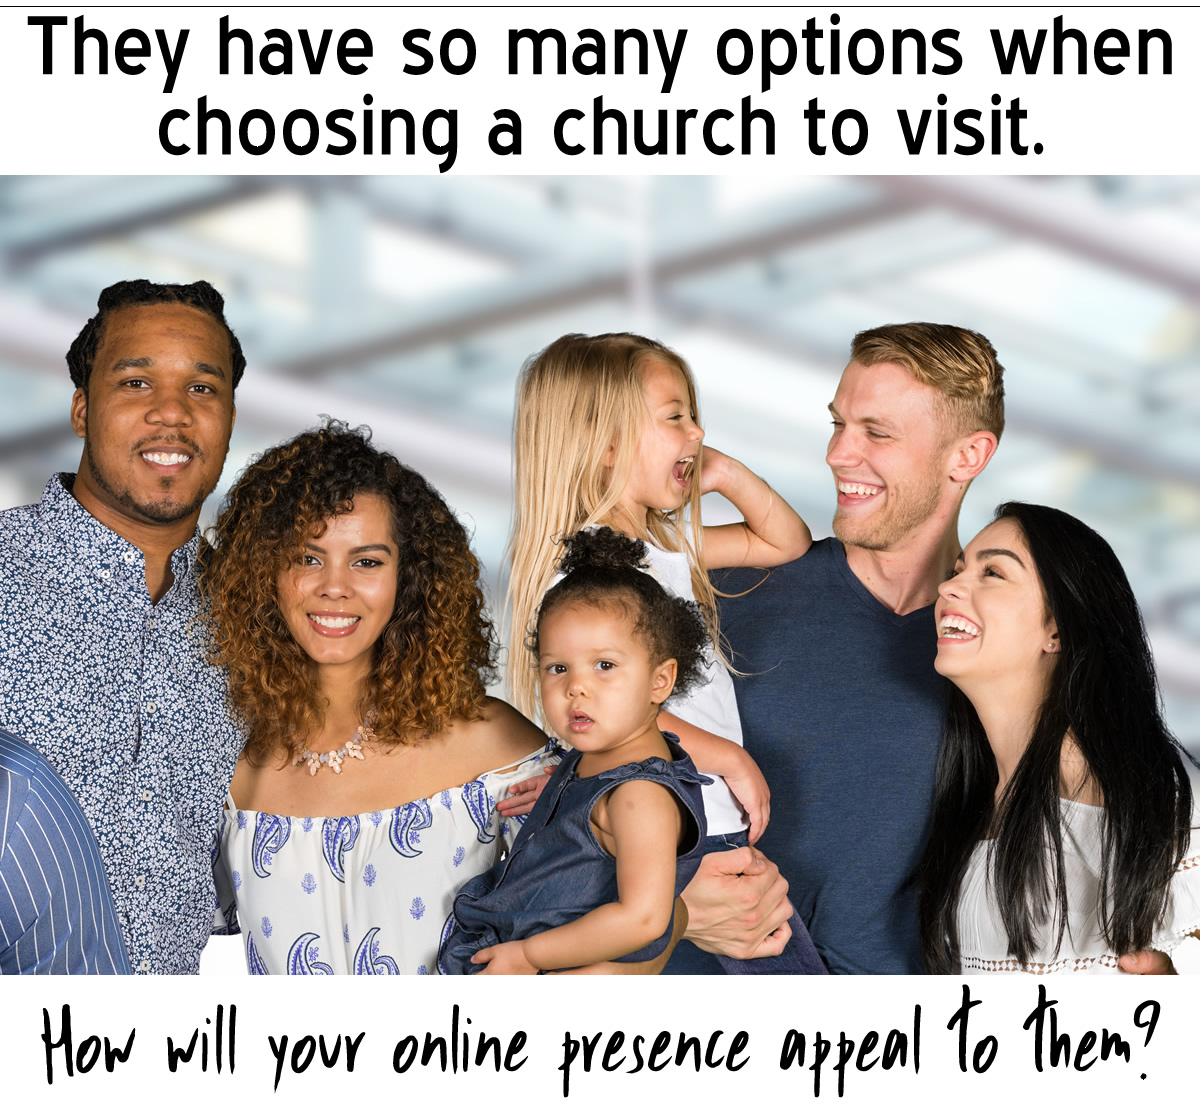 Families have many options when choosing a church to visit. Why choose yours?